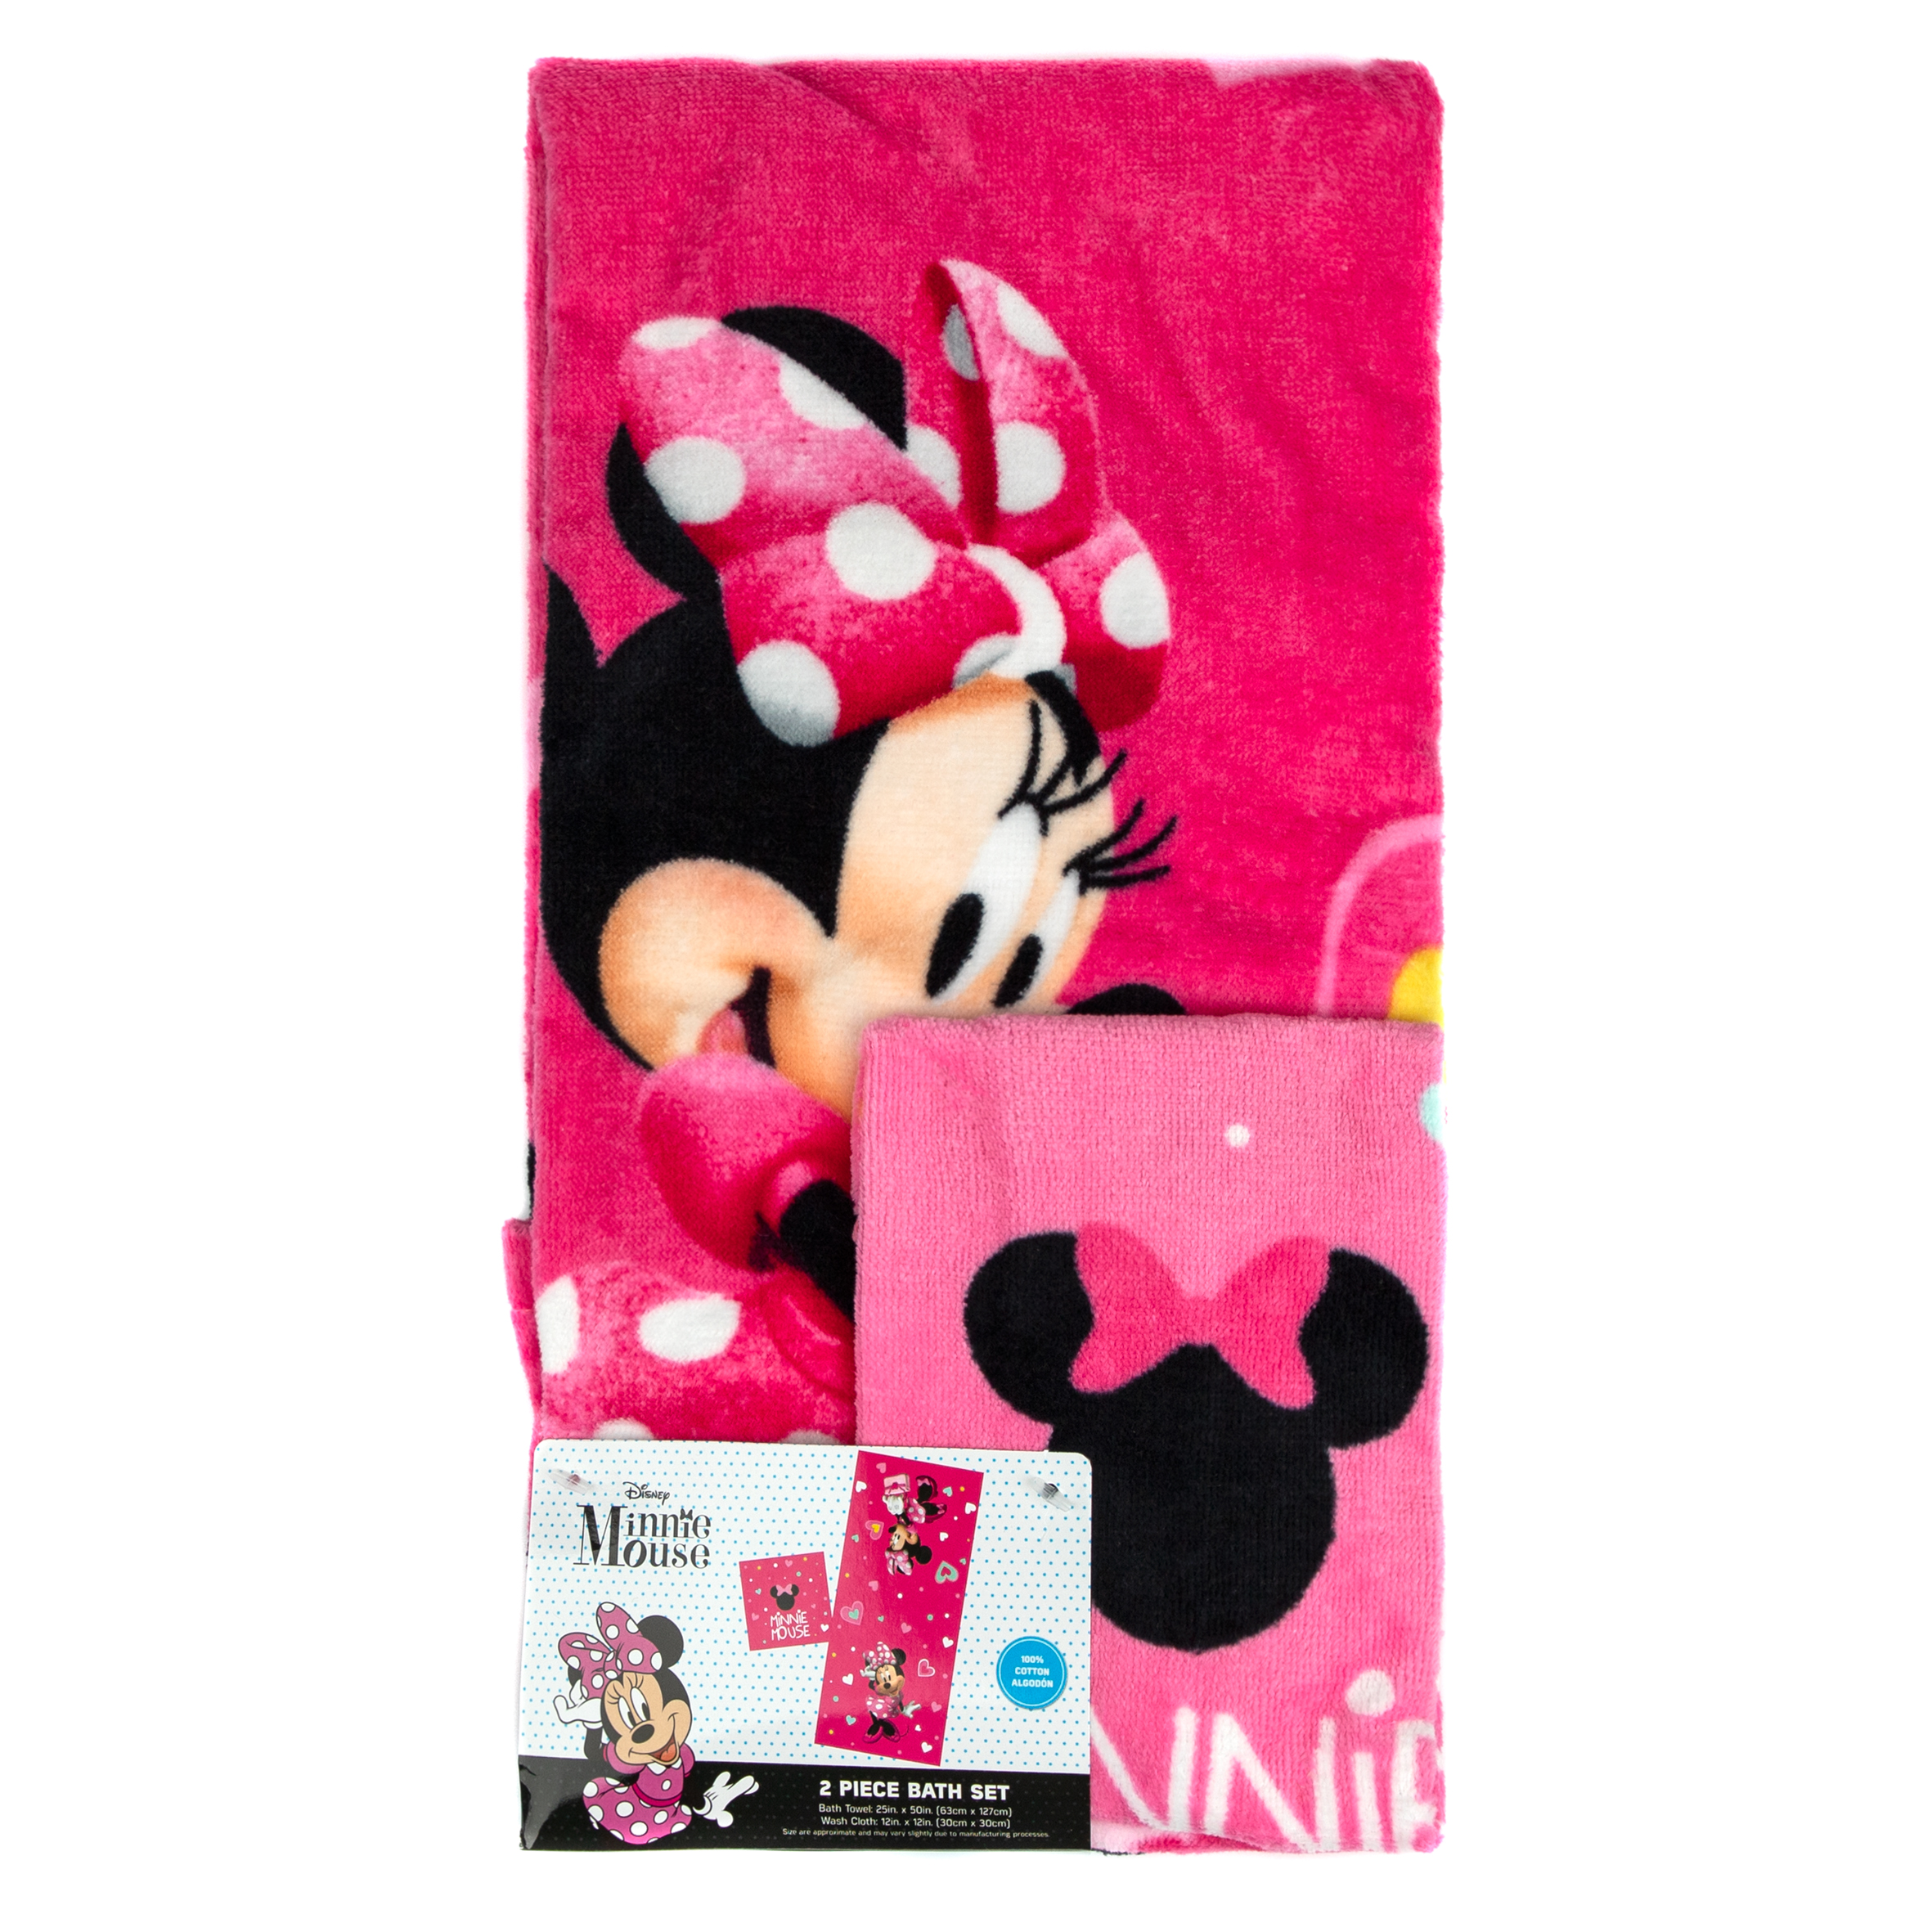 Minnie Mouse Kids Cotton 2 Piece Towel and Washcloth Set - image 8 of 8